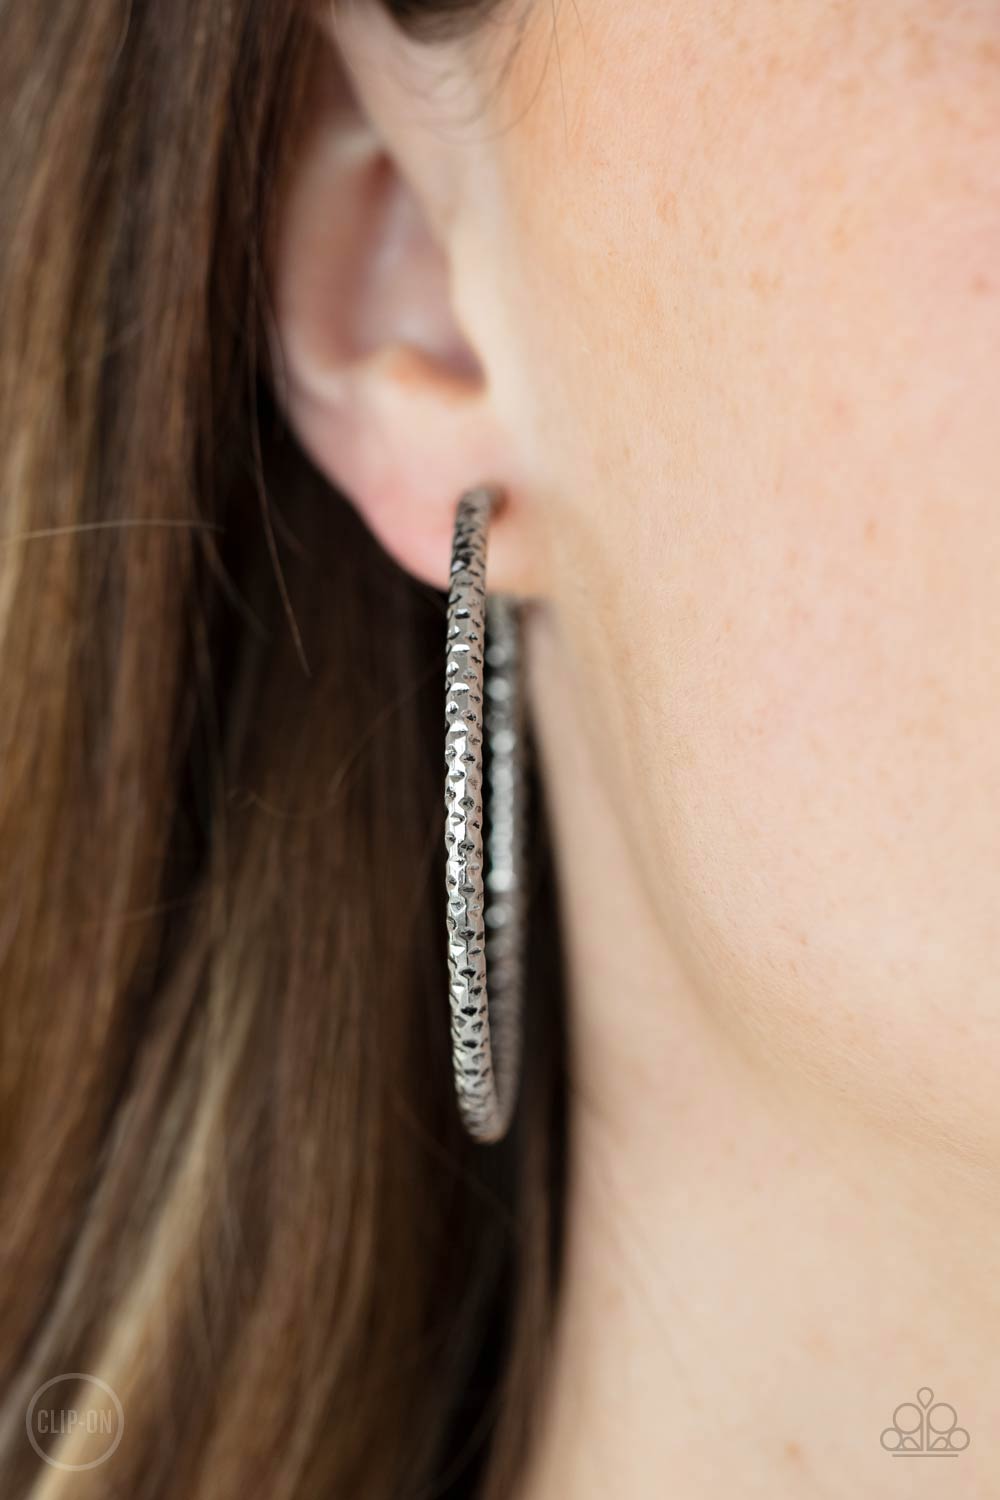 Subtly Sassy - Silver Hoop Earrings - Sabrina's Bling Collection